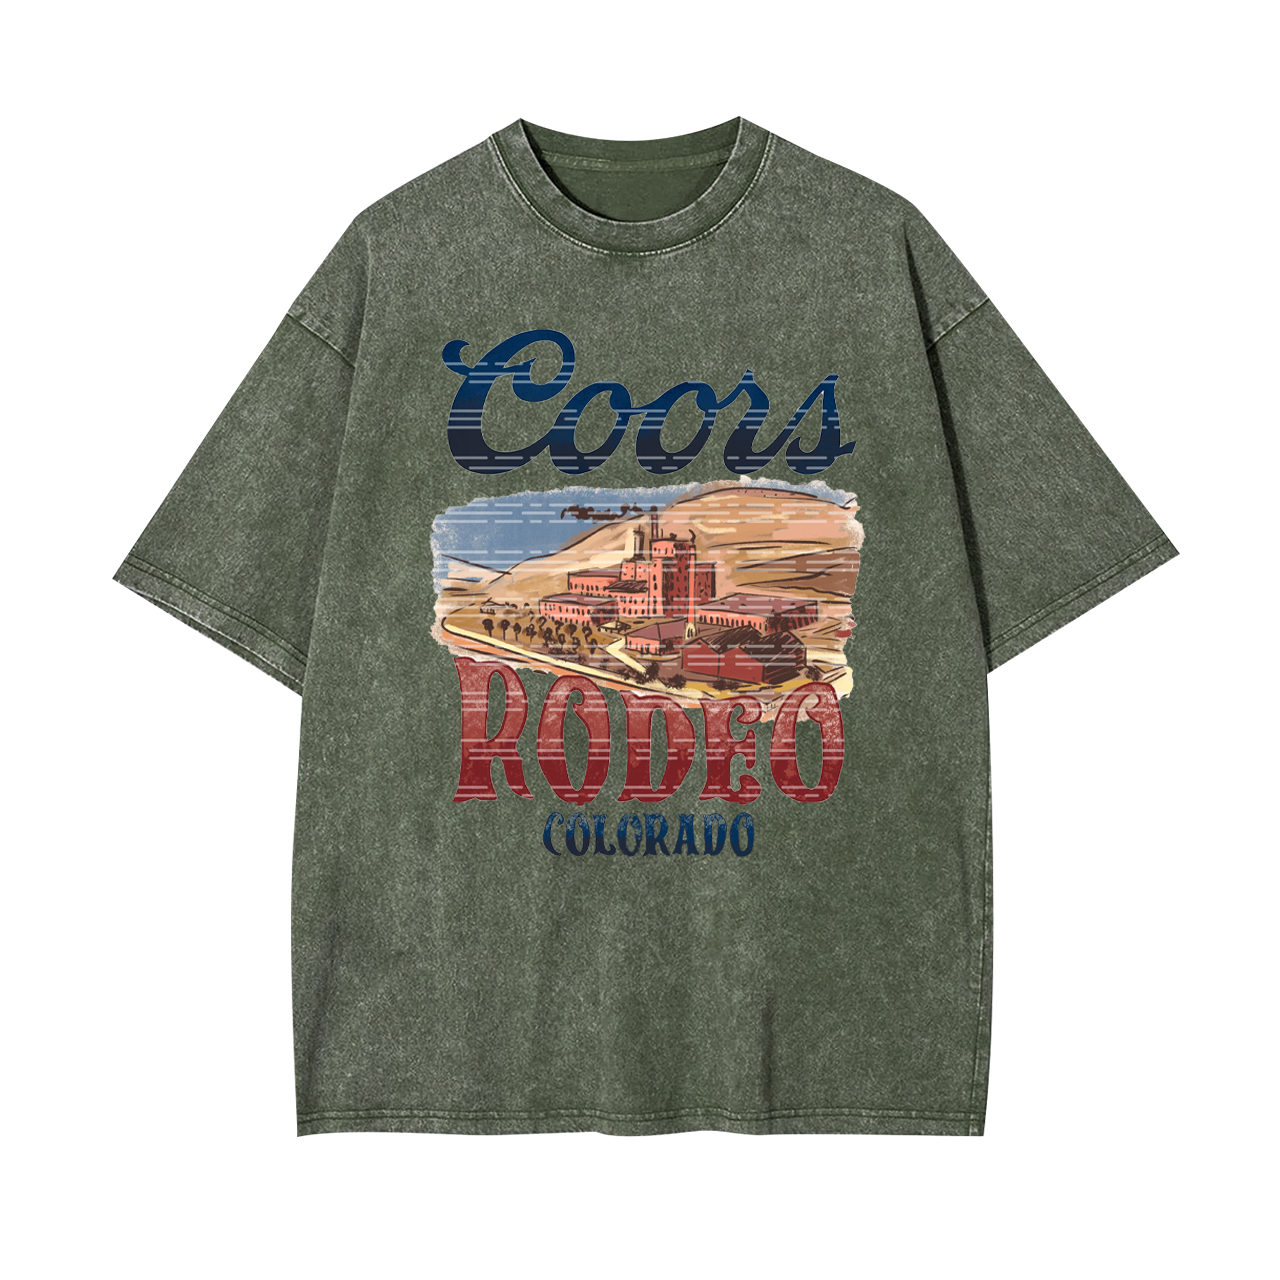 Coors and Rodeo Garment-dye Tees